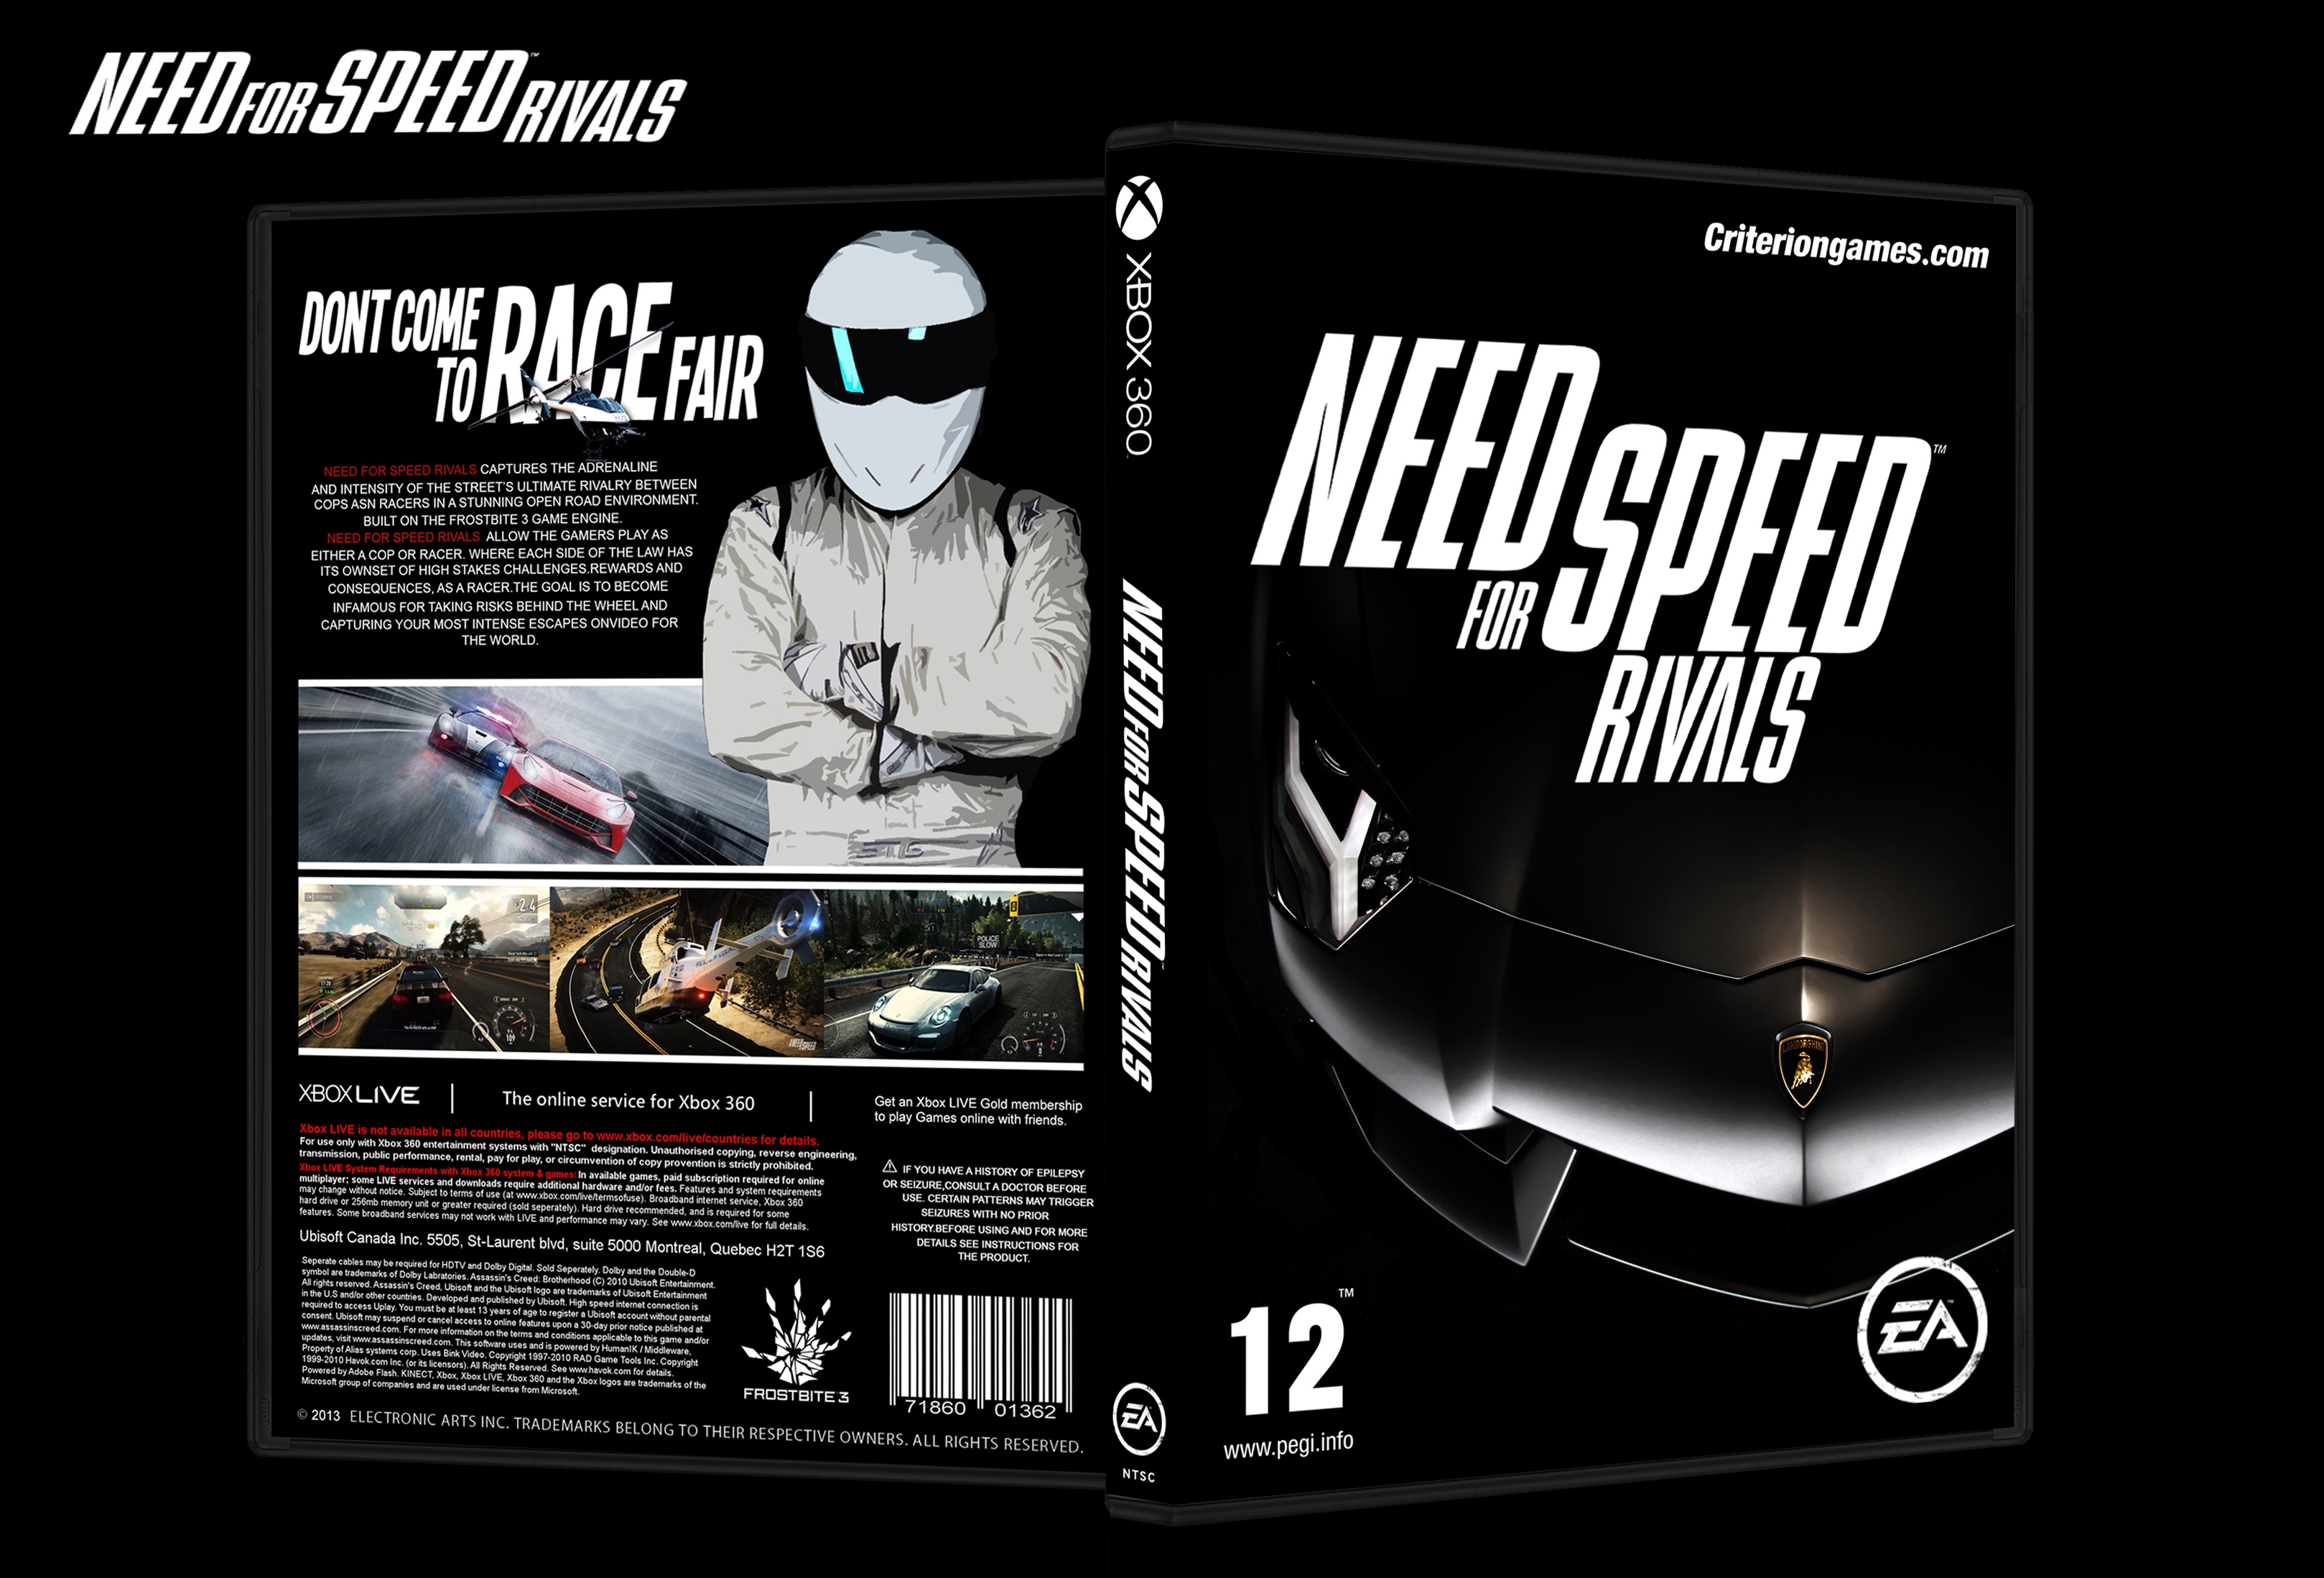 Need For Speed Rivals Xbox 360 Used